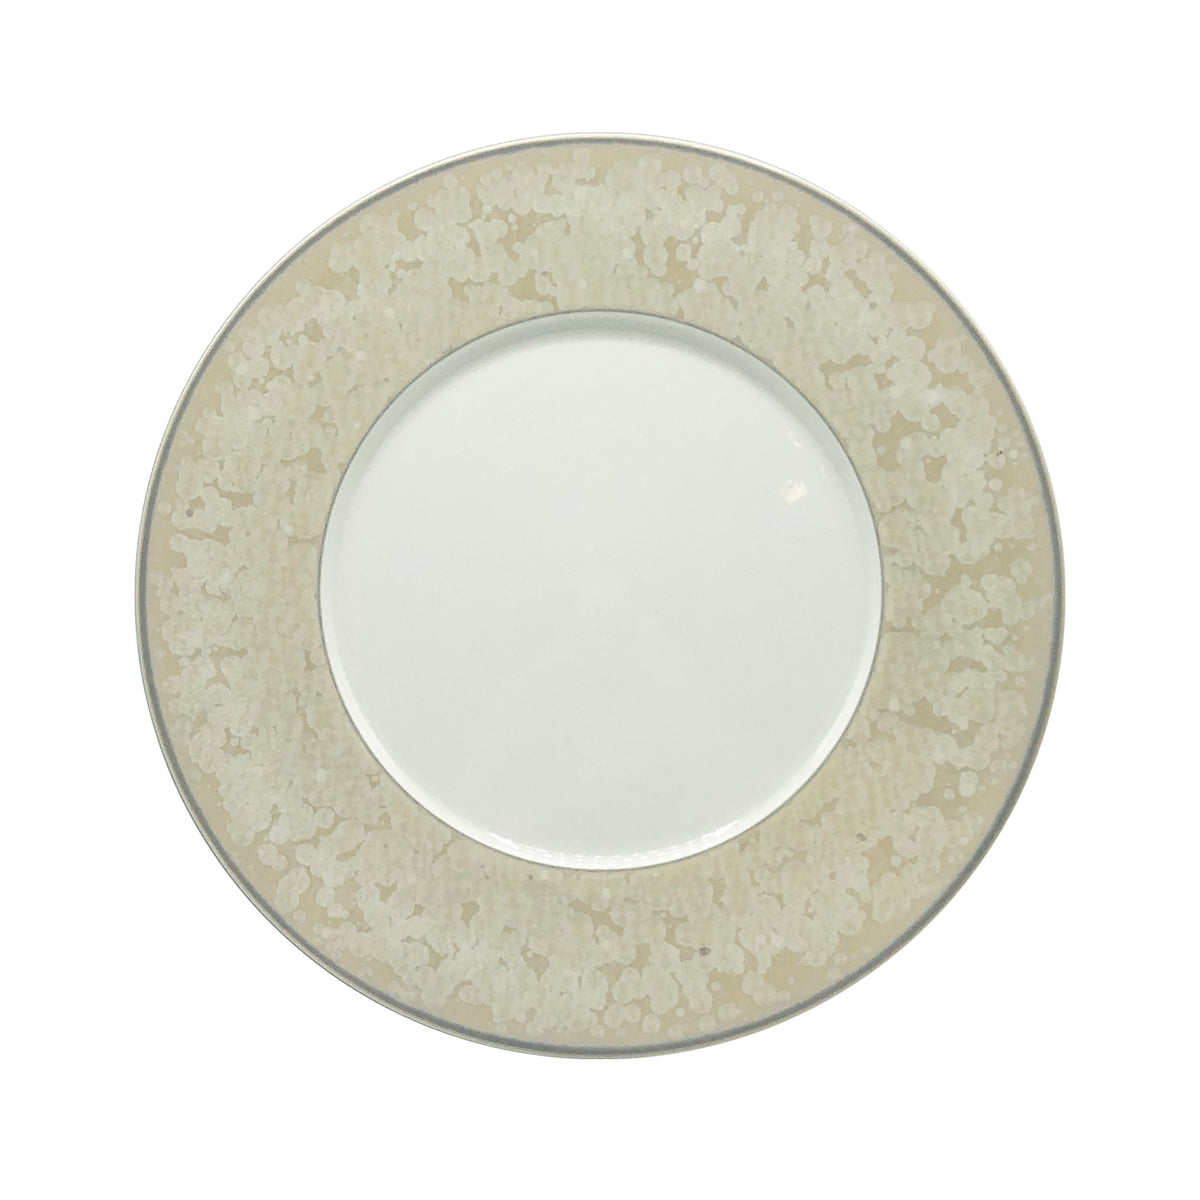 SONG Perle - Assiette plate, 2011